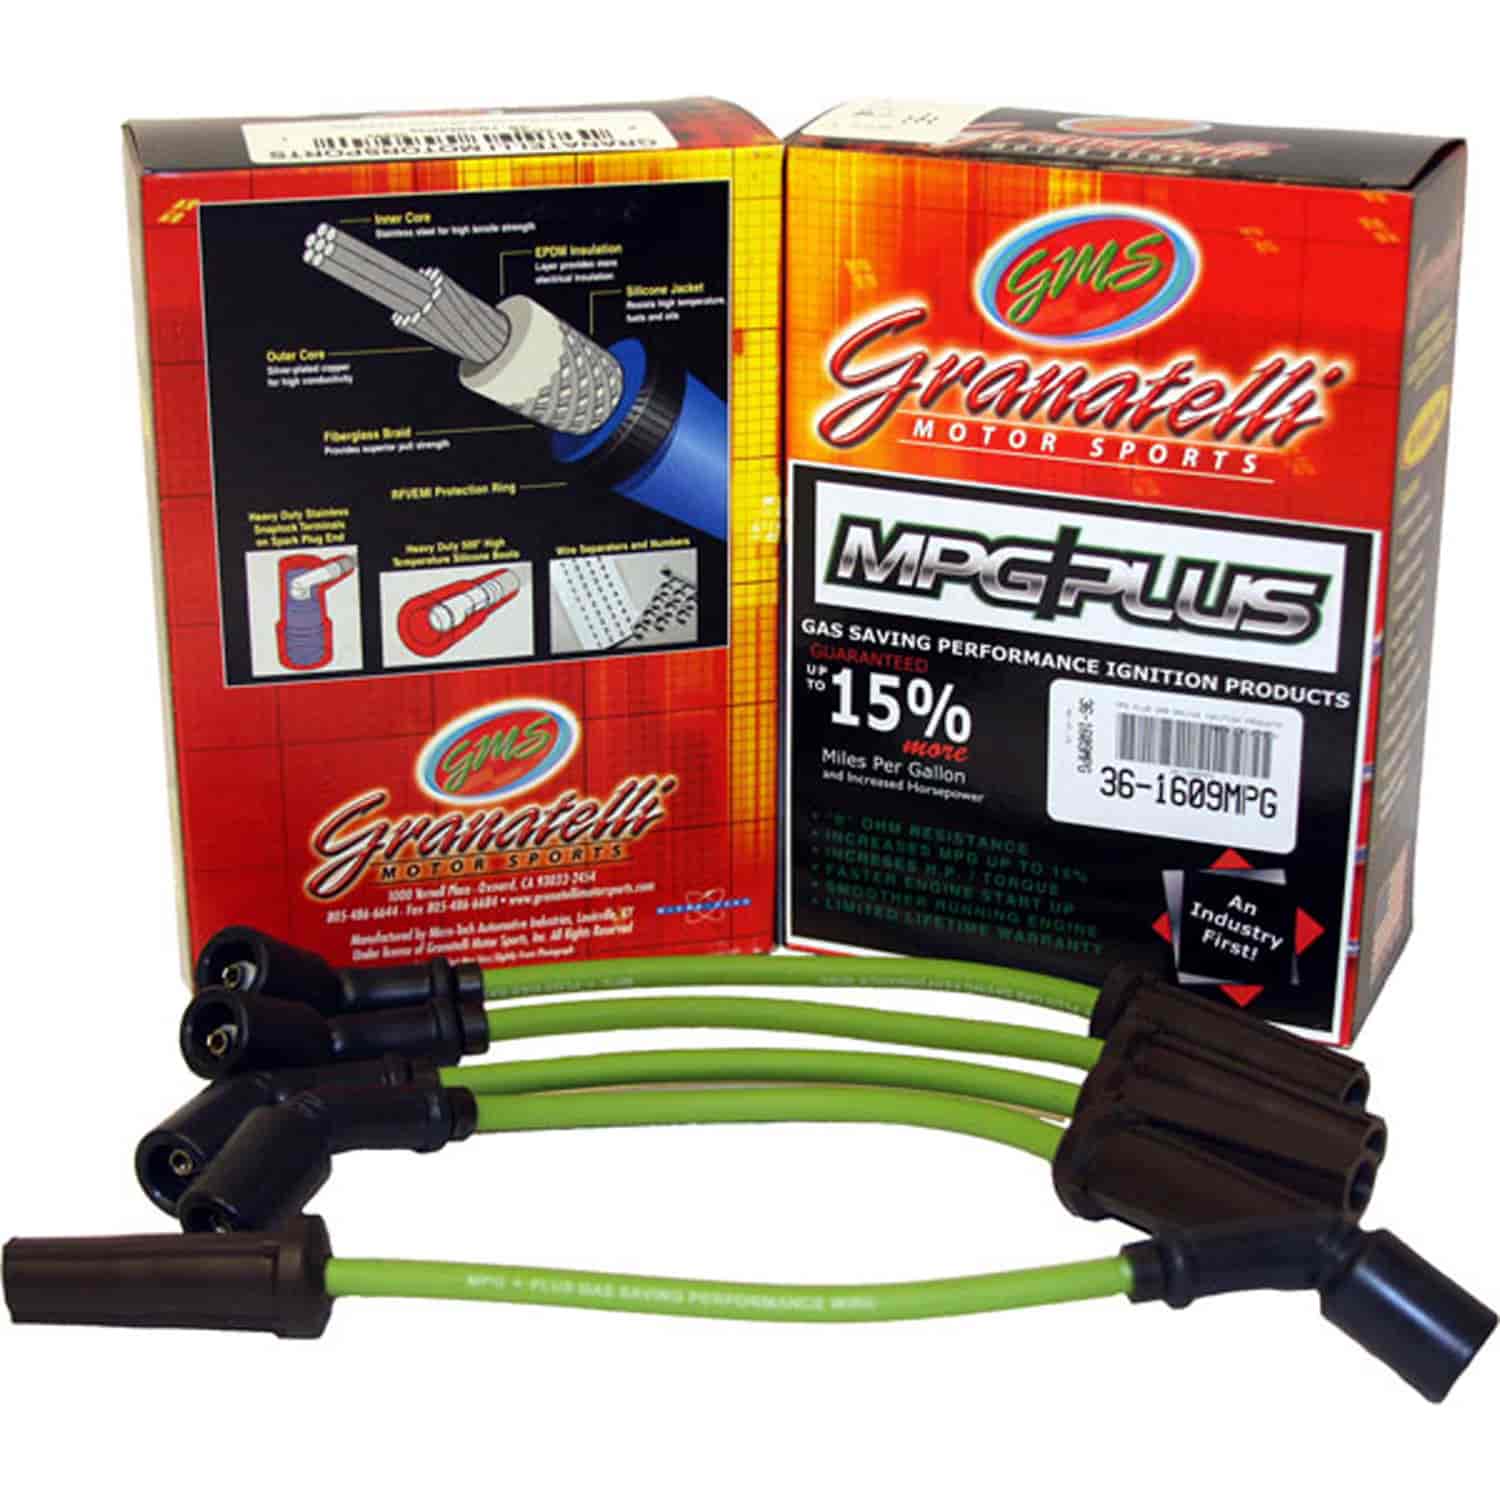 MPG Wires MAZDA RX SERIES 2CYL 1.3L 04-07